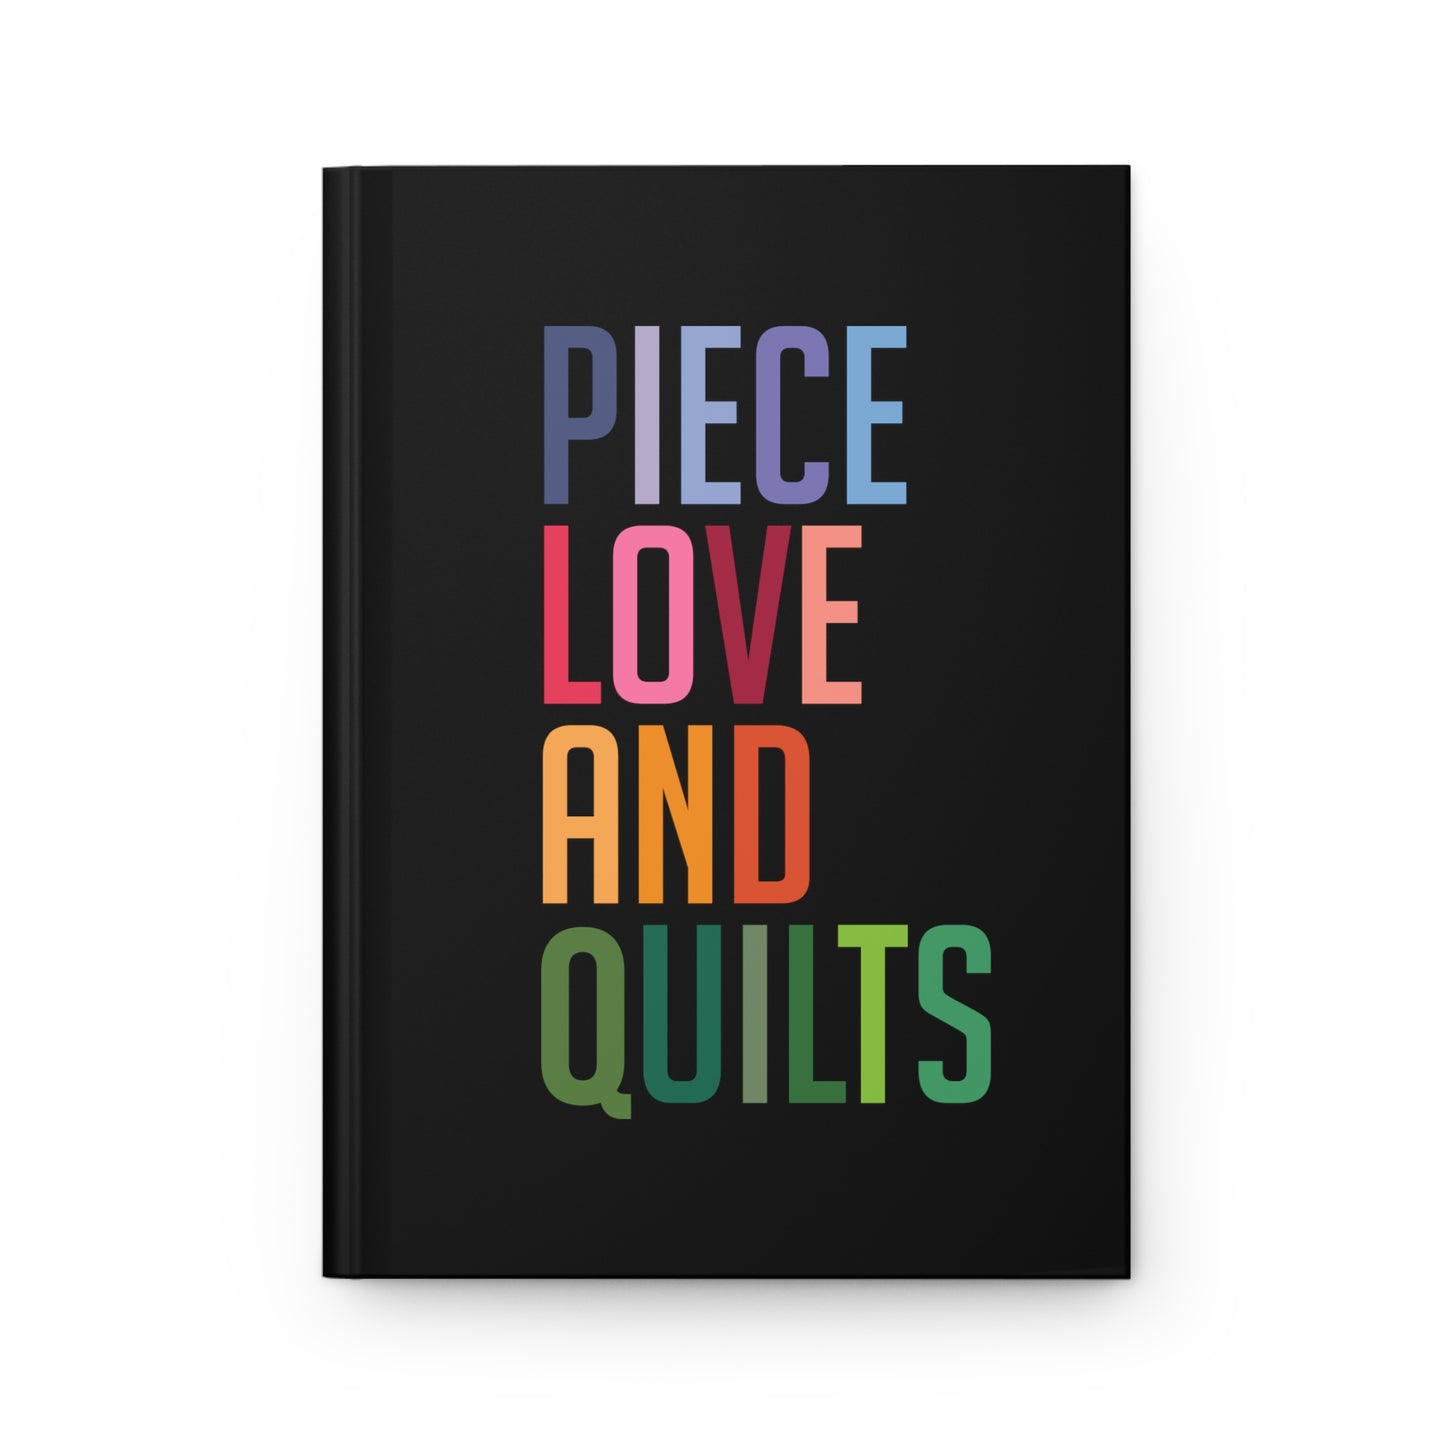 Piece, Love, and Quilts Journal